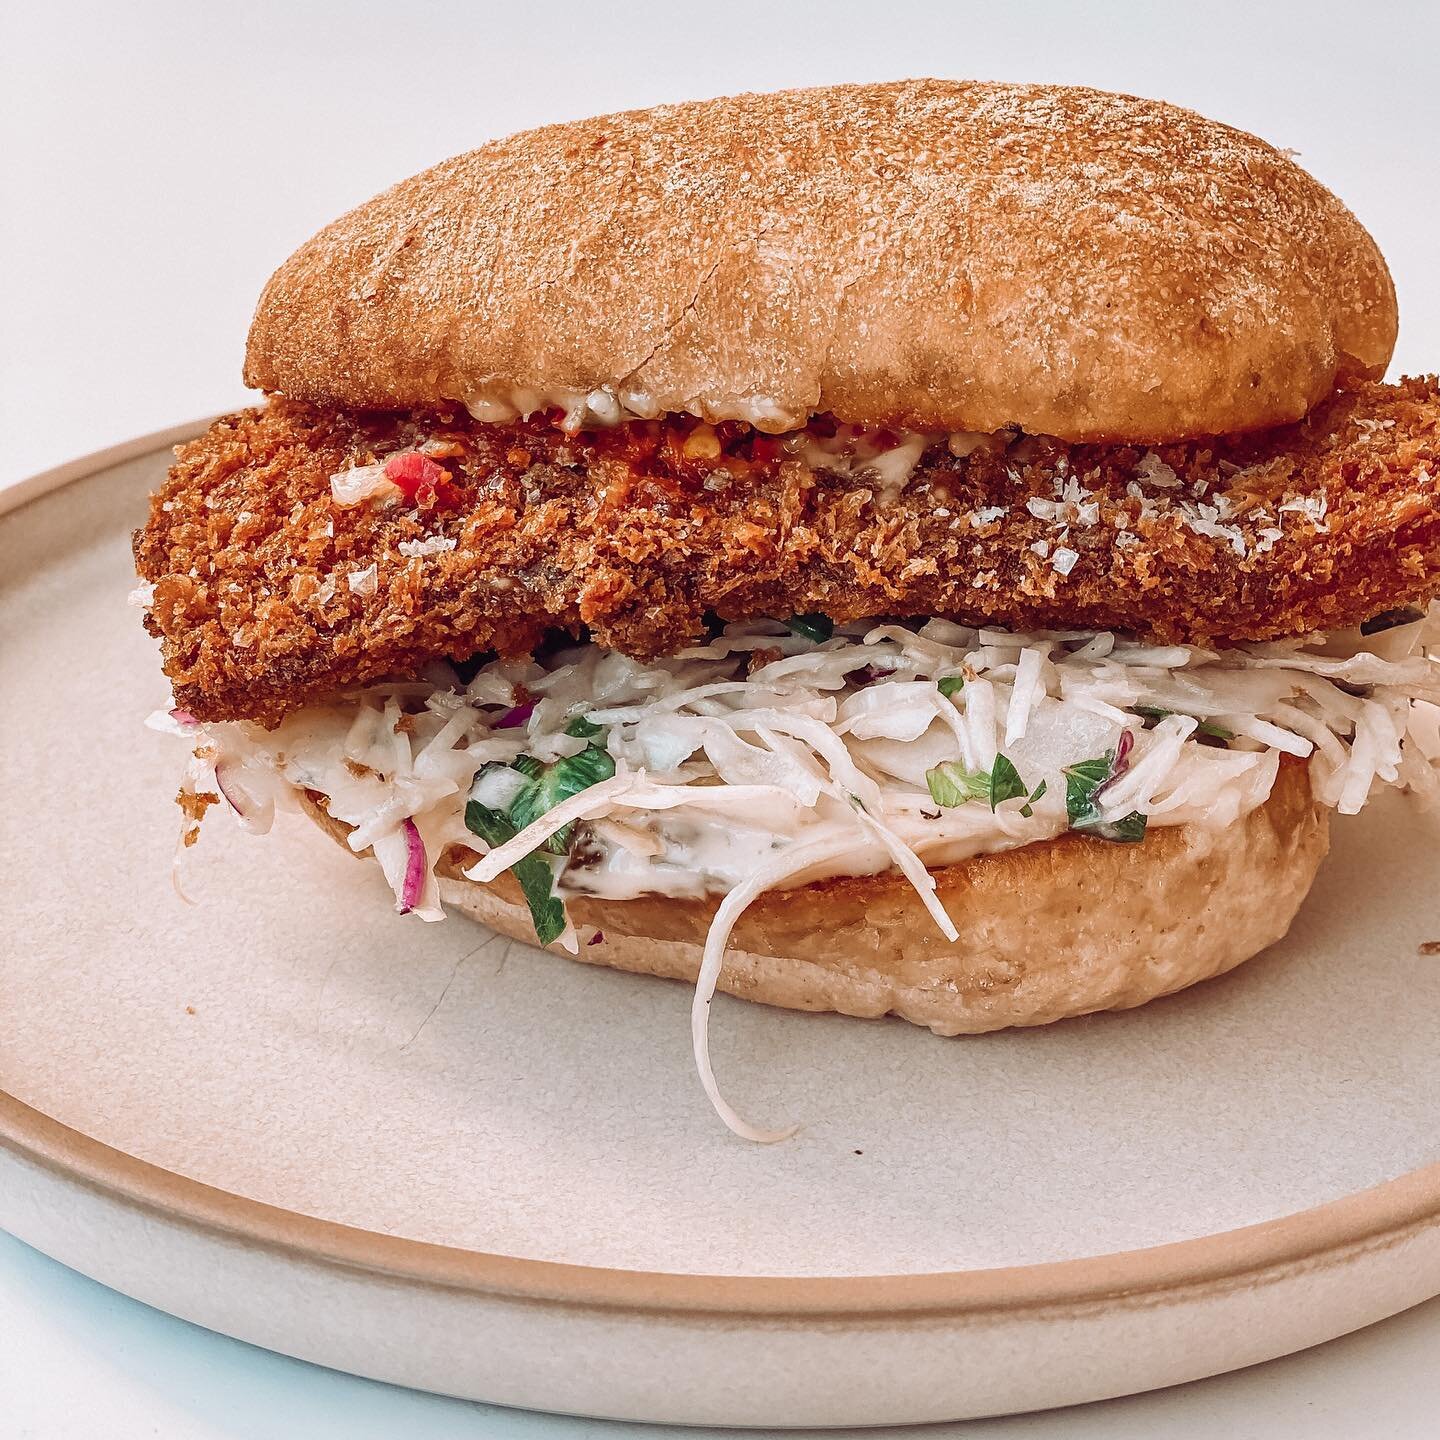 I&rsquo;ll just leave this delicious burger here for you to look at. 🐠 🍔 

Crumbled barramundi, nestled on a bed of cabbage slaw, topped with homemade tartar sauce, tucked inside a soft, organic sourdough bun. 

This beautiful thing is from @fishsh